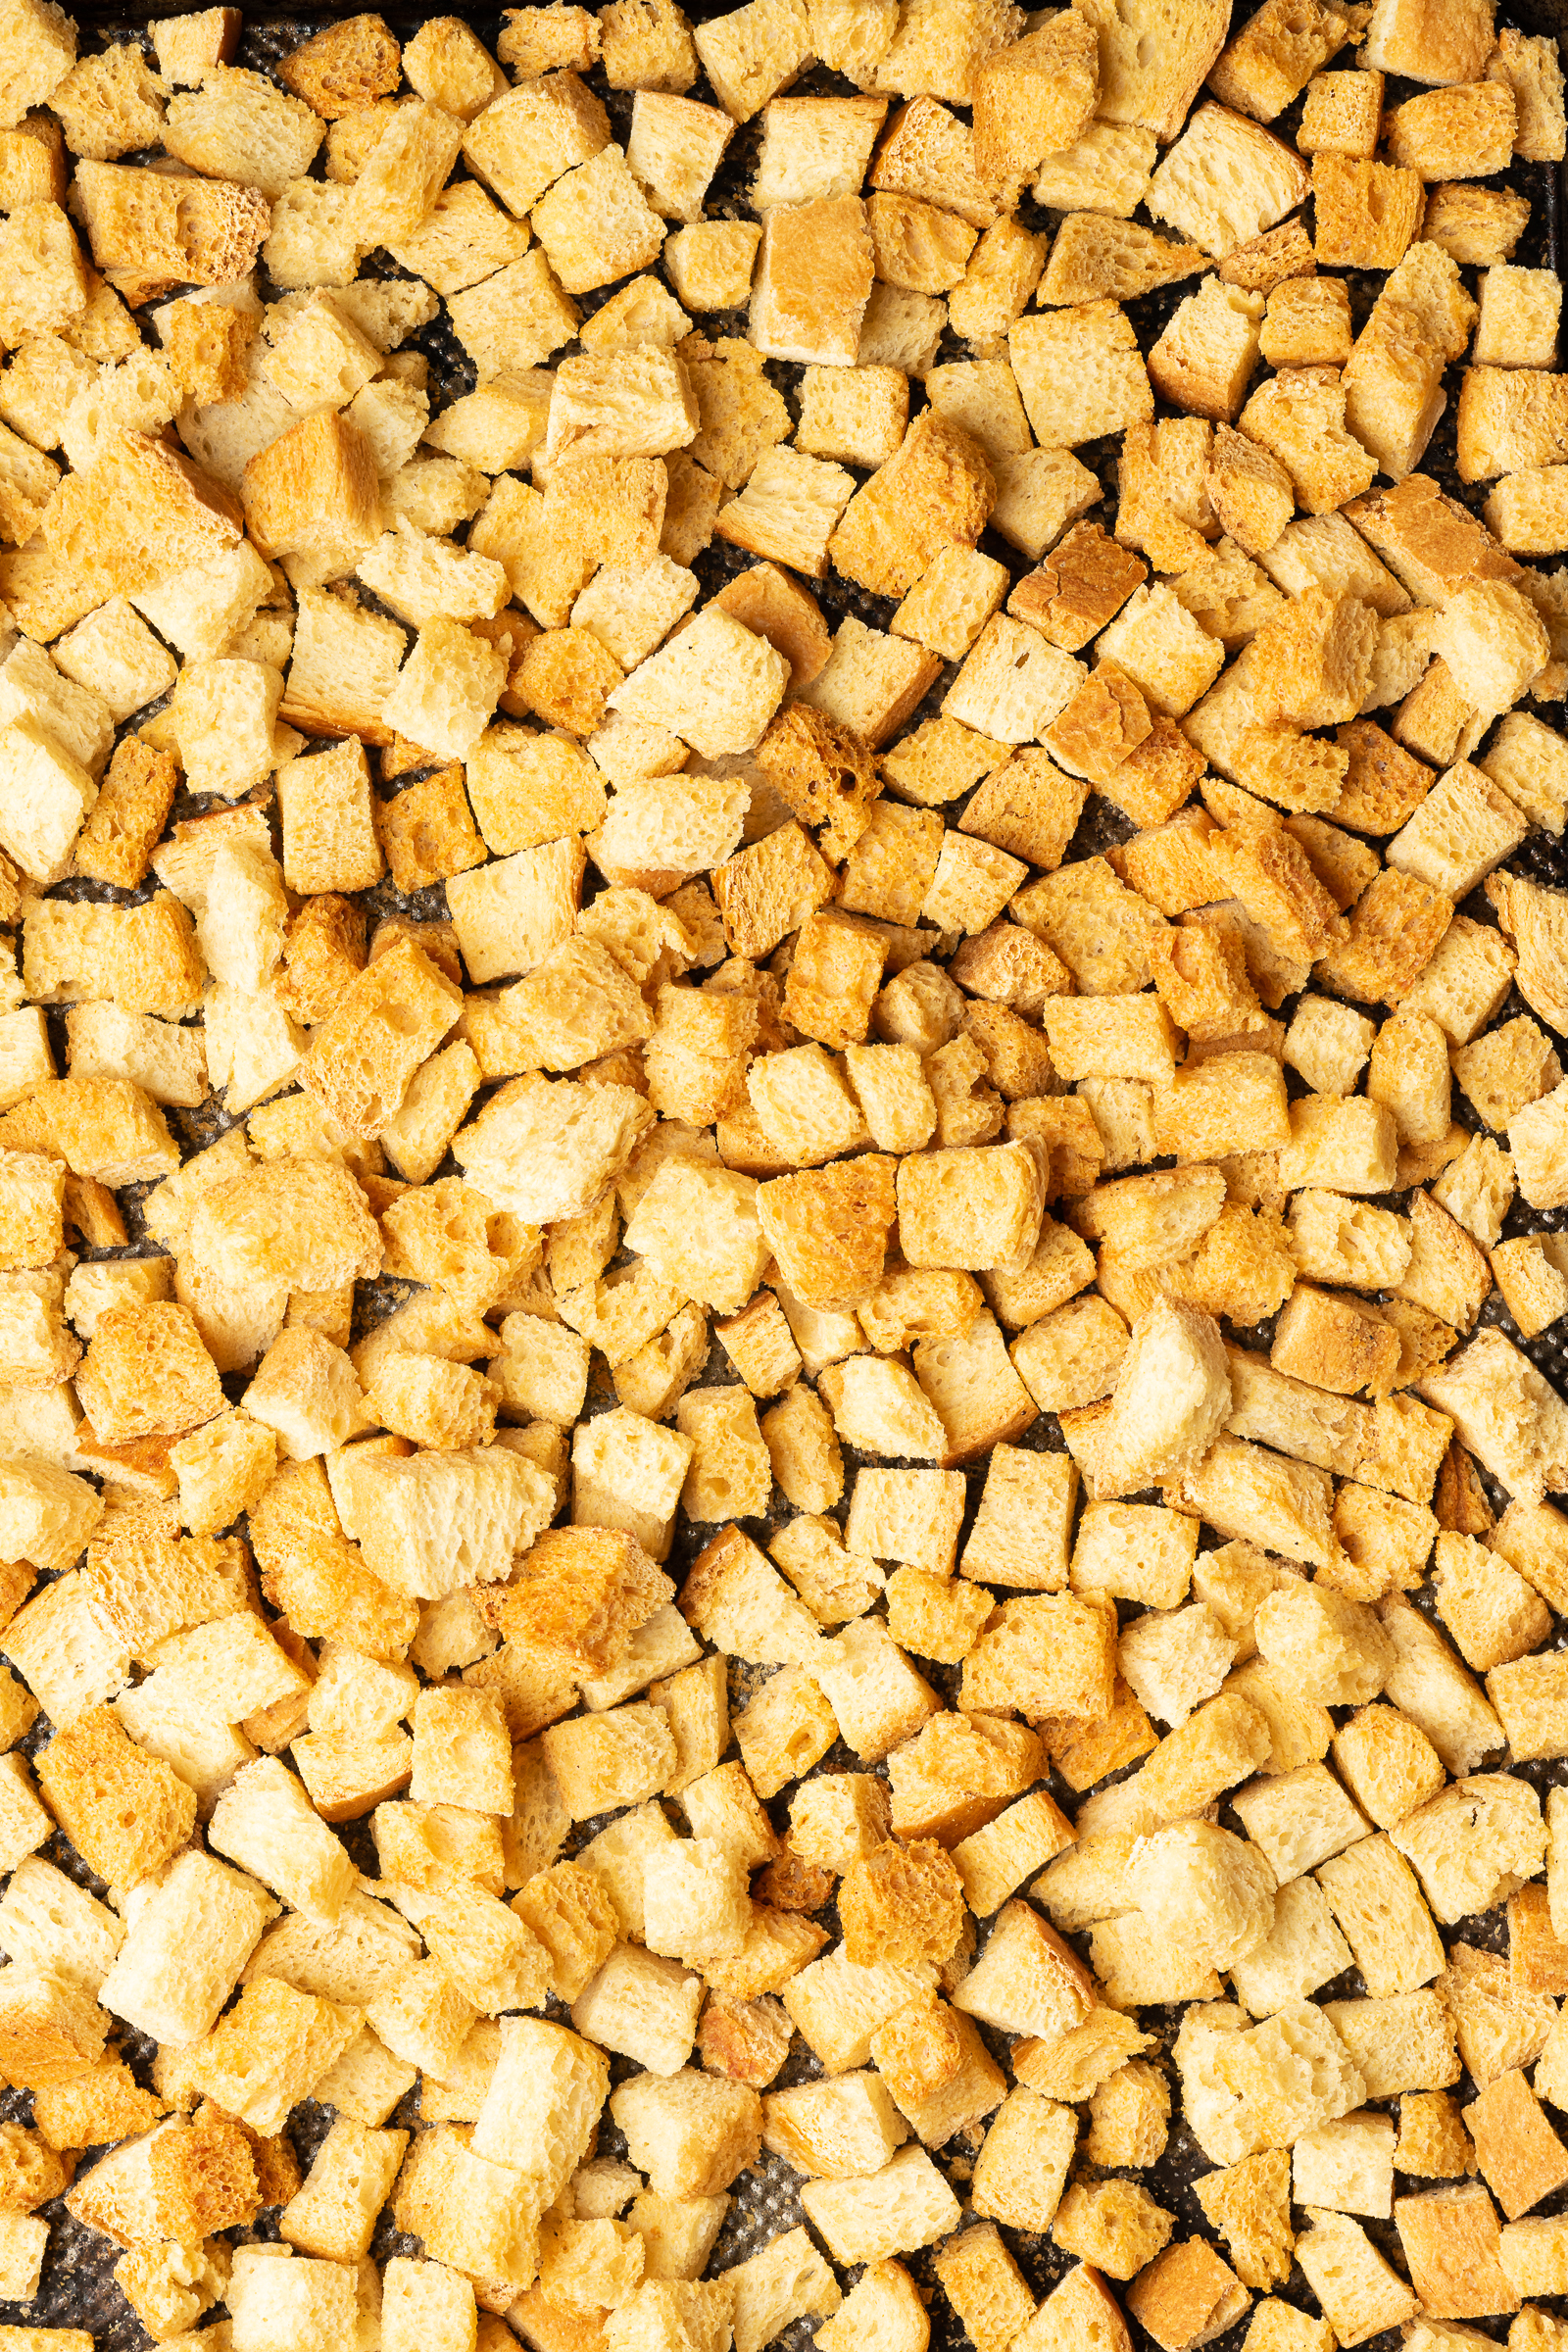 Dried crispy bread cubes on a baking tray.